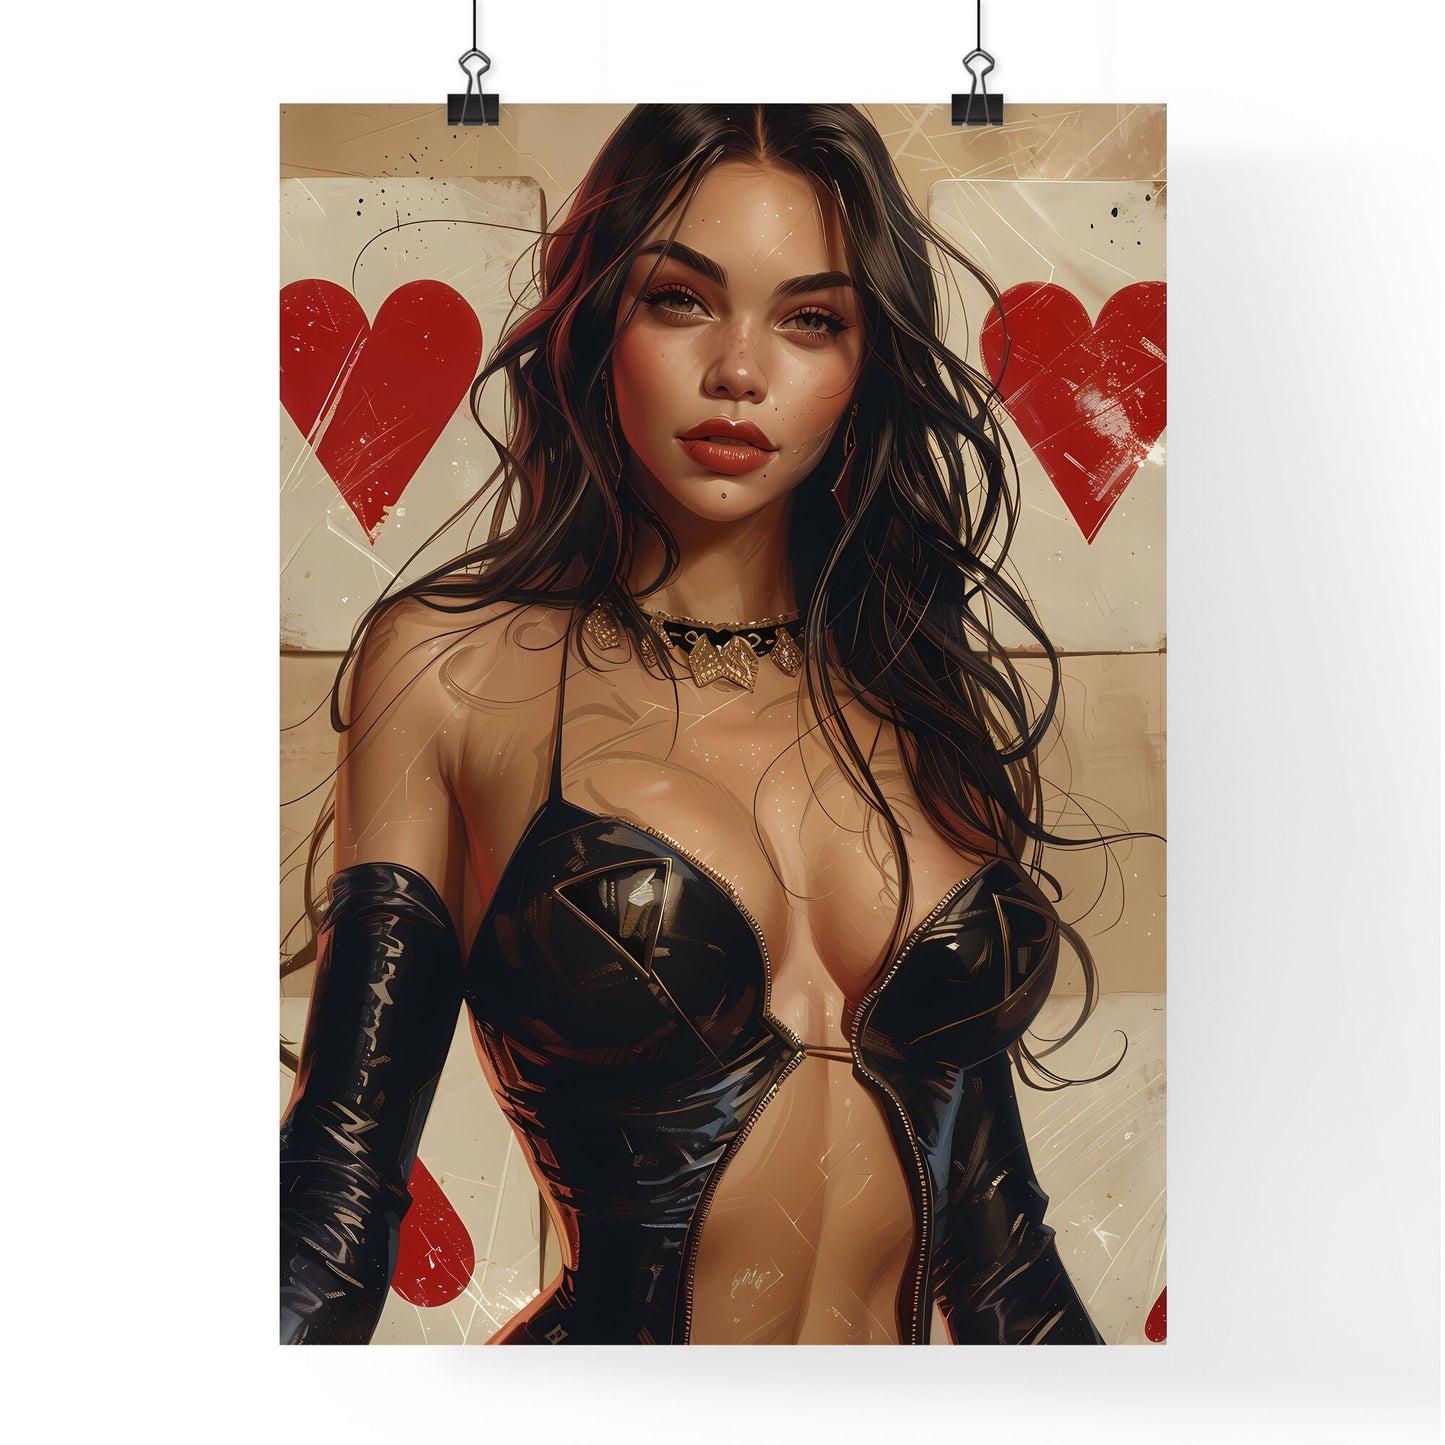 Marvelous Queen of Hearts Poker Card Art: Cute Teen Girl with Old Paper Backdrop in Black Dress Default Title